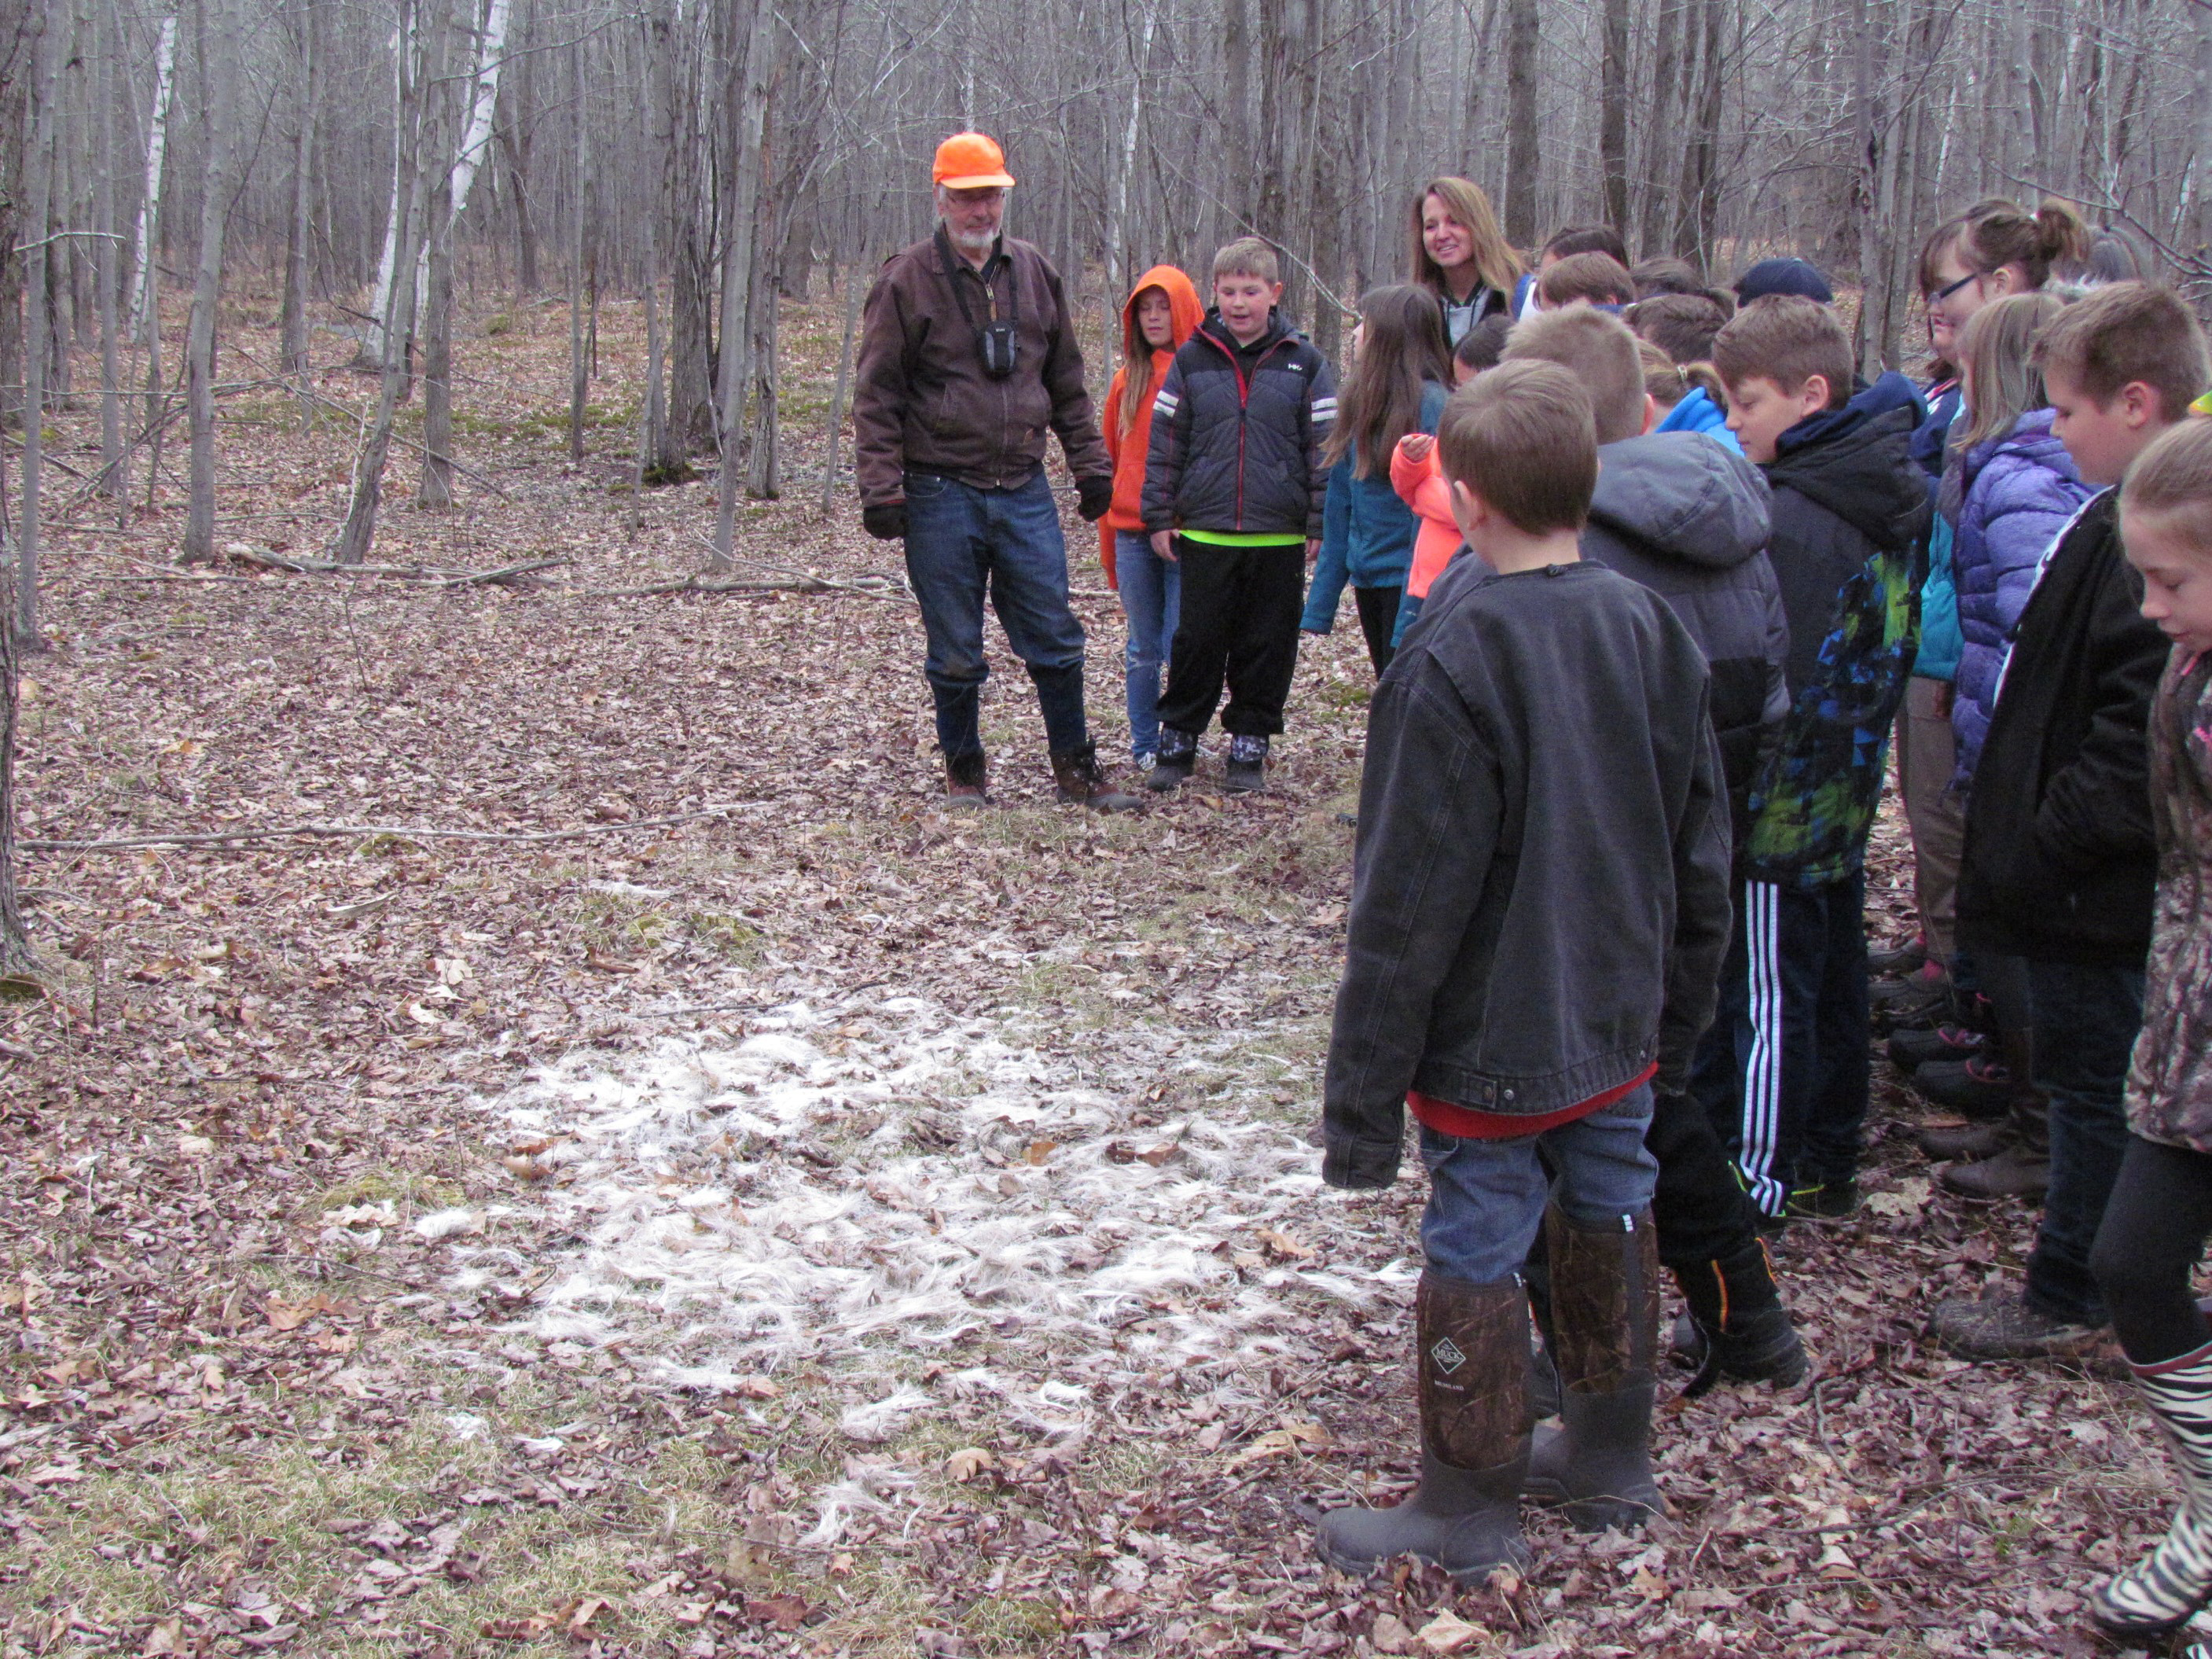 Linwood 4th graders viewing remains of deer in the woods